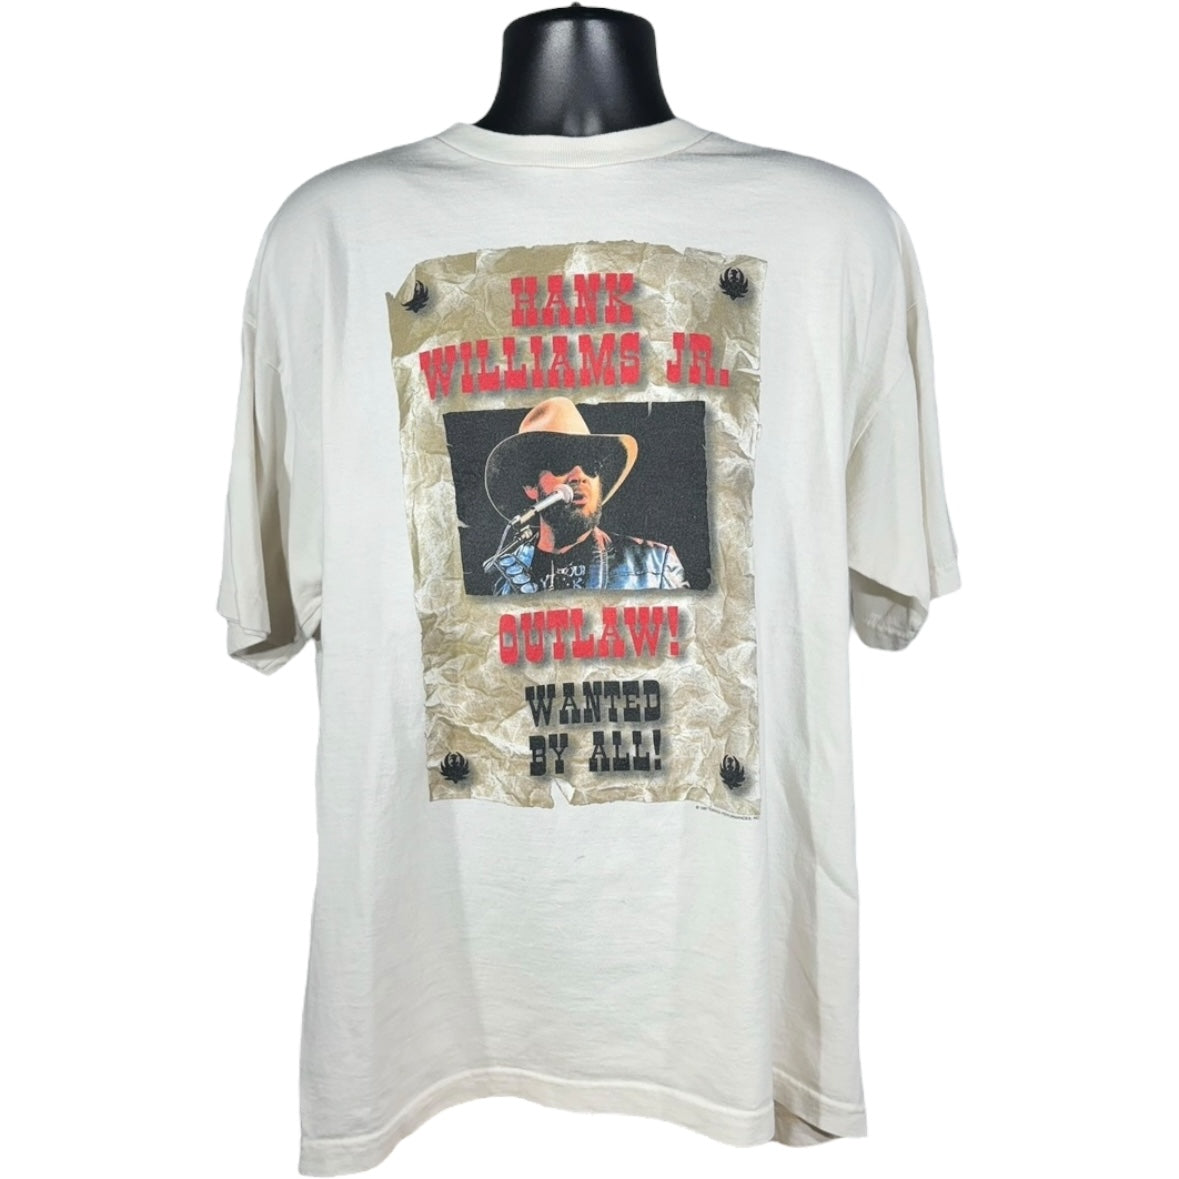 Vintage Hank Williams Jr. "Outlaw! Wanted By All" Tee 1997